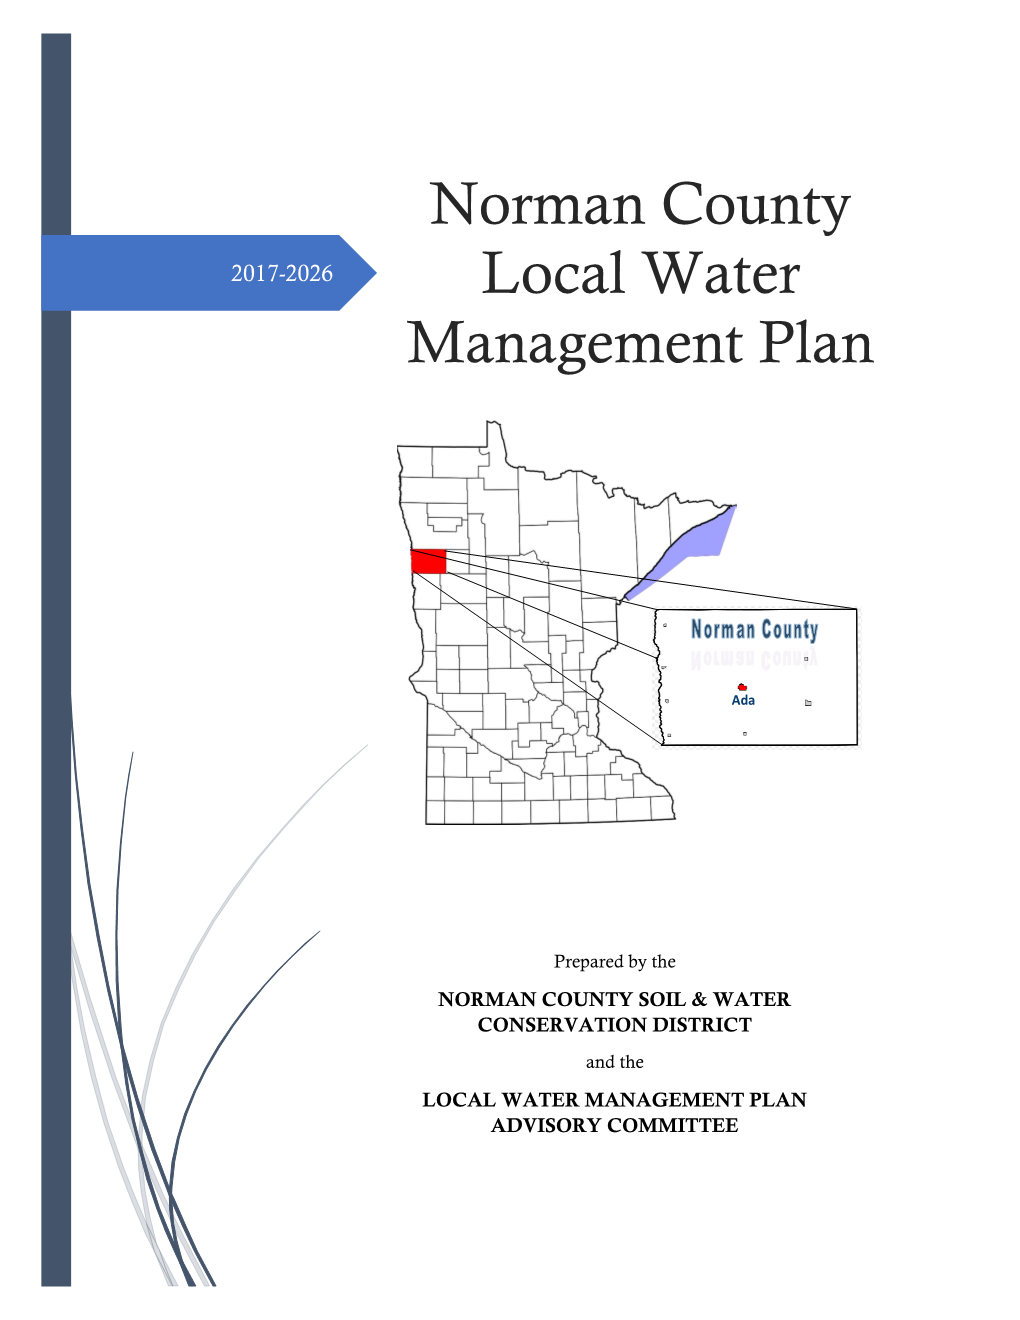 Norman County Local Water Management Plan